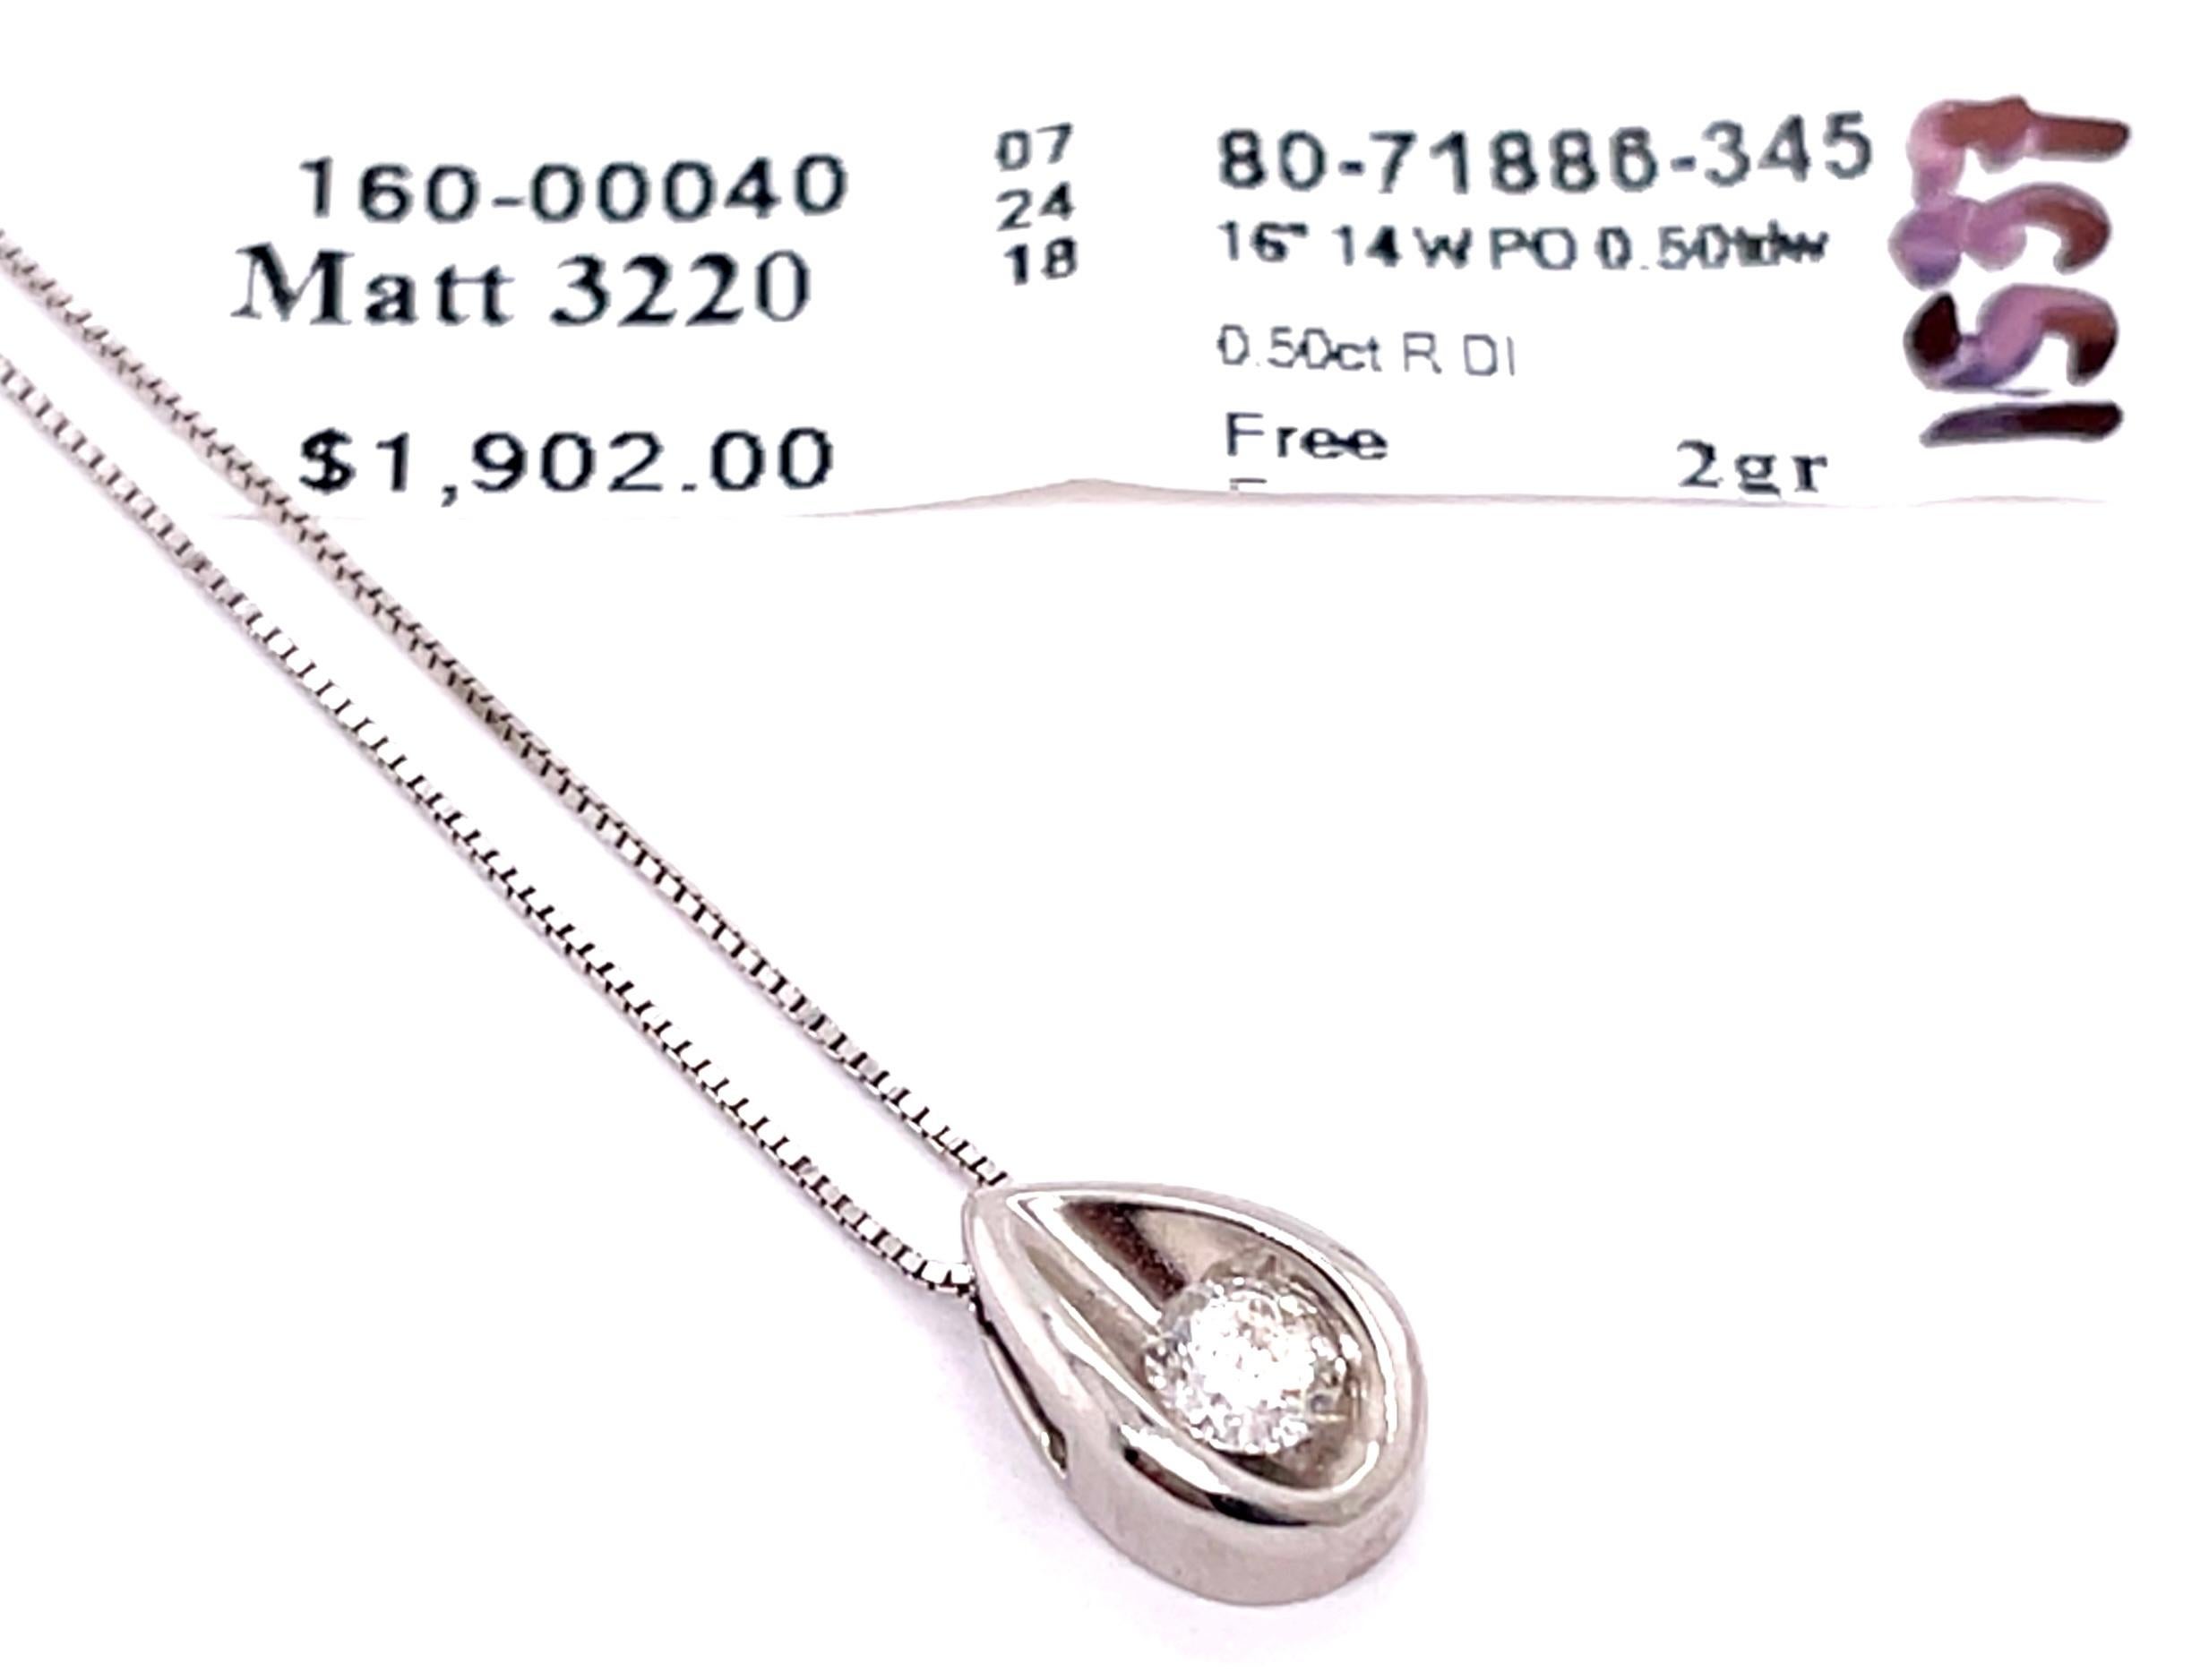 14 Karat White Gold 16 Inch Free Form Necklace with Diamond Pendant For Sale 1